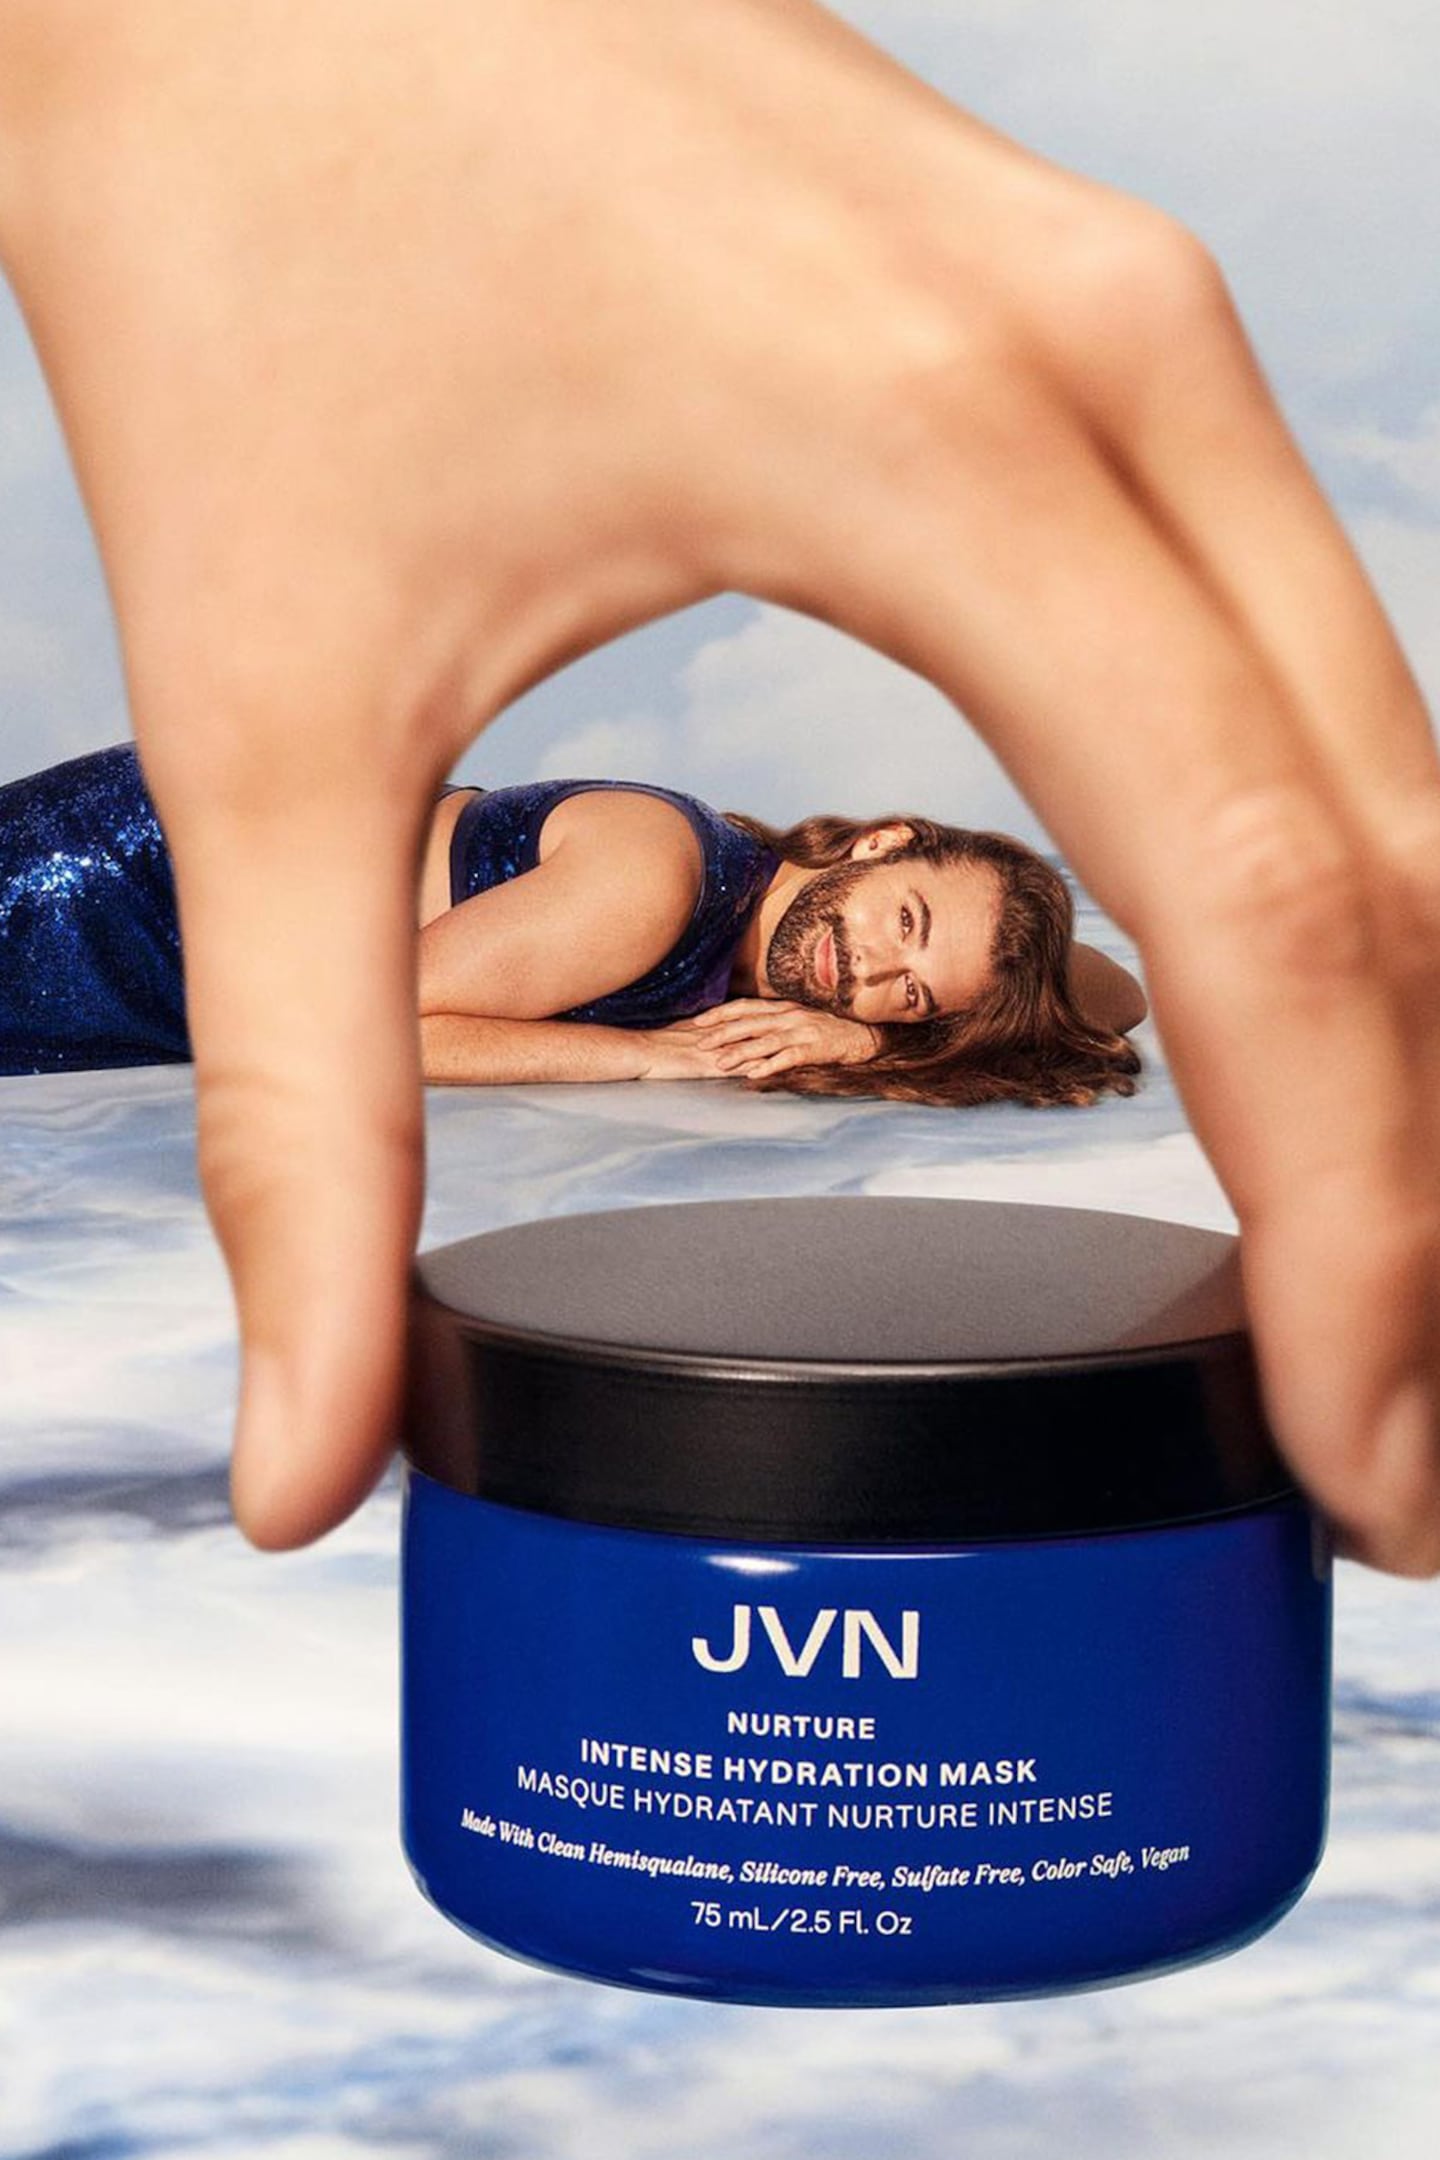 An image of Johnathan Van Ness playfully posing with a hair product.